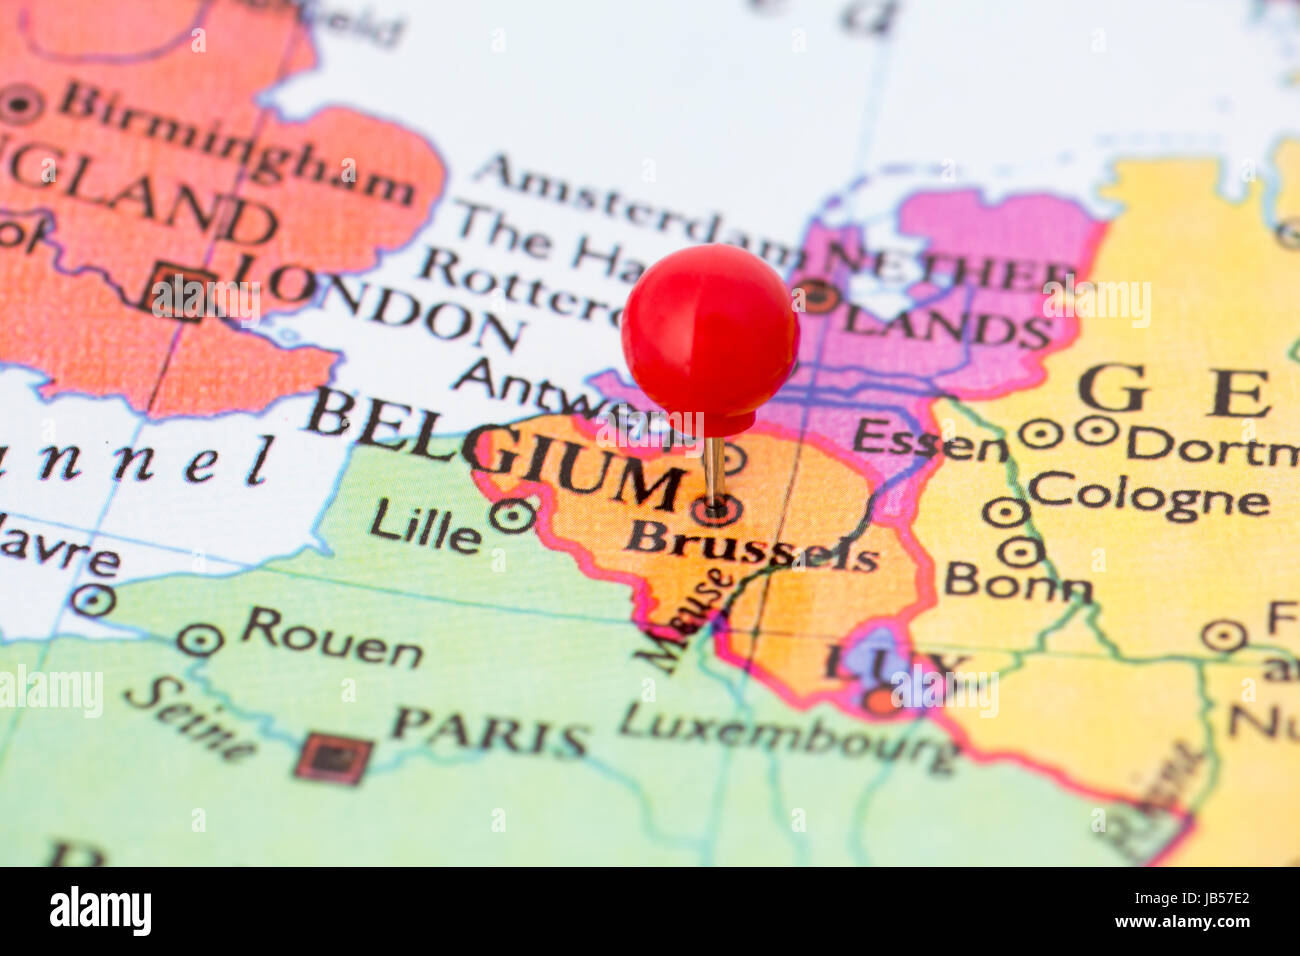 Round red thumb tack pinched through Brussels on Belgium map. Part of collection covering all major capitals of Europe. Stock Photo